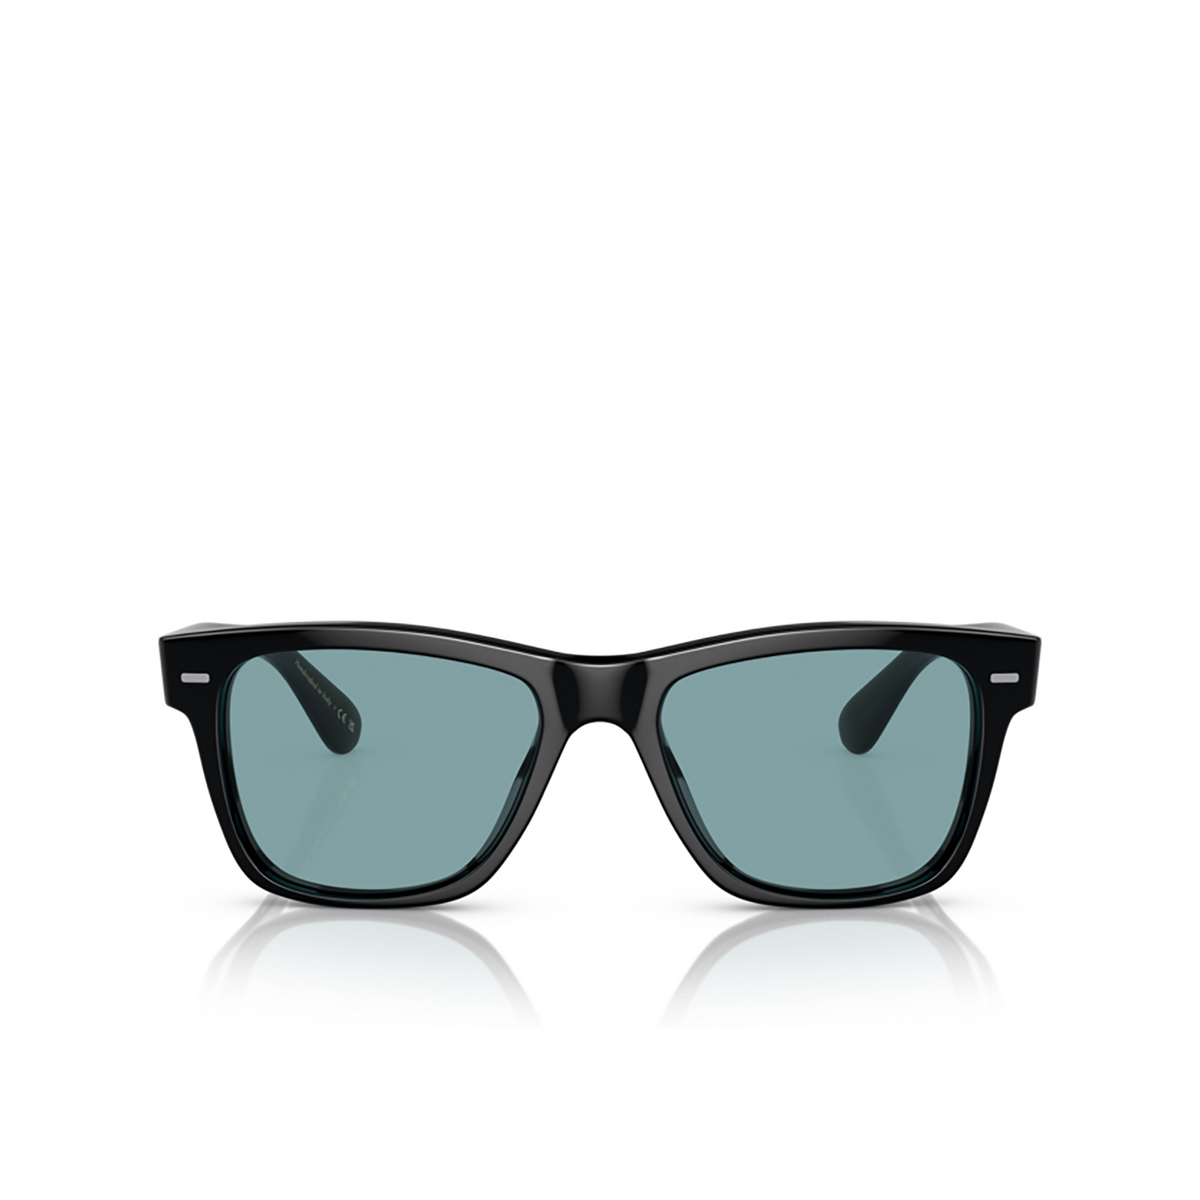 Oliver Peoples OLIVER Sunglasses 1005P1 Black - front view